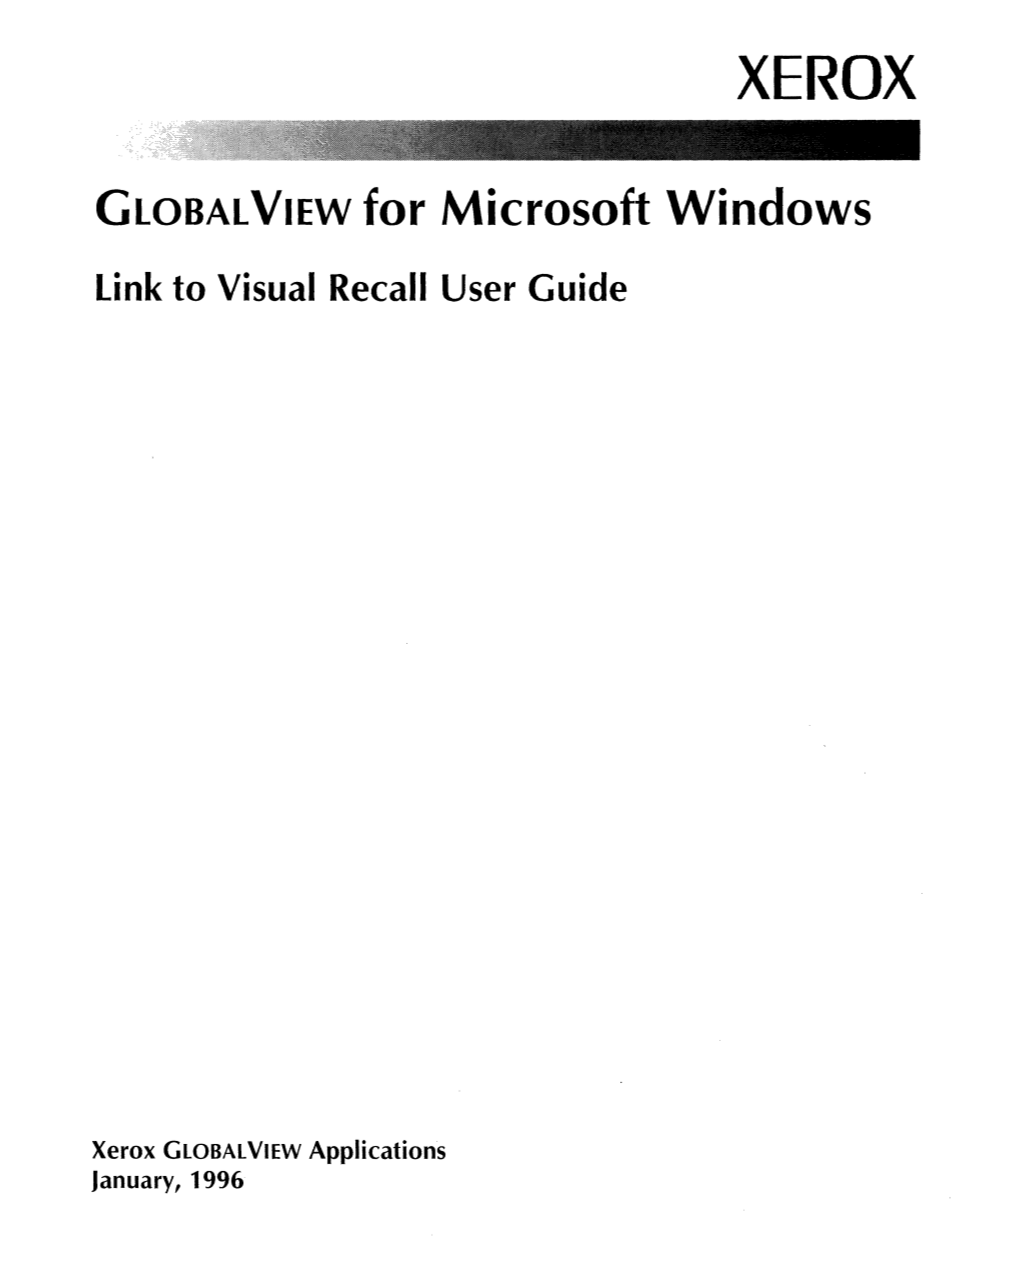 GLOBAL VIEW for Microsoft Windows, and Visual Recall, As It Does Not Provide Detailed Information on These Applications